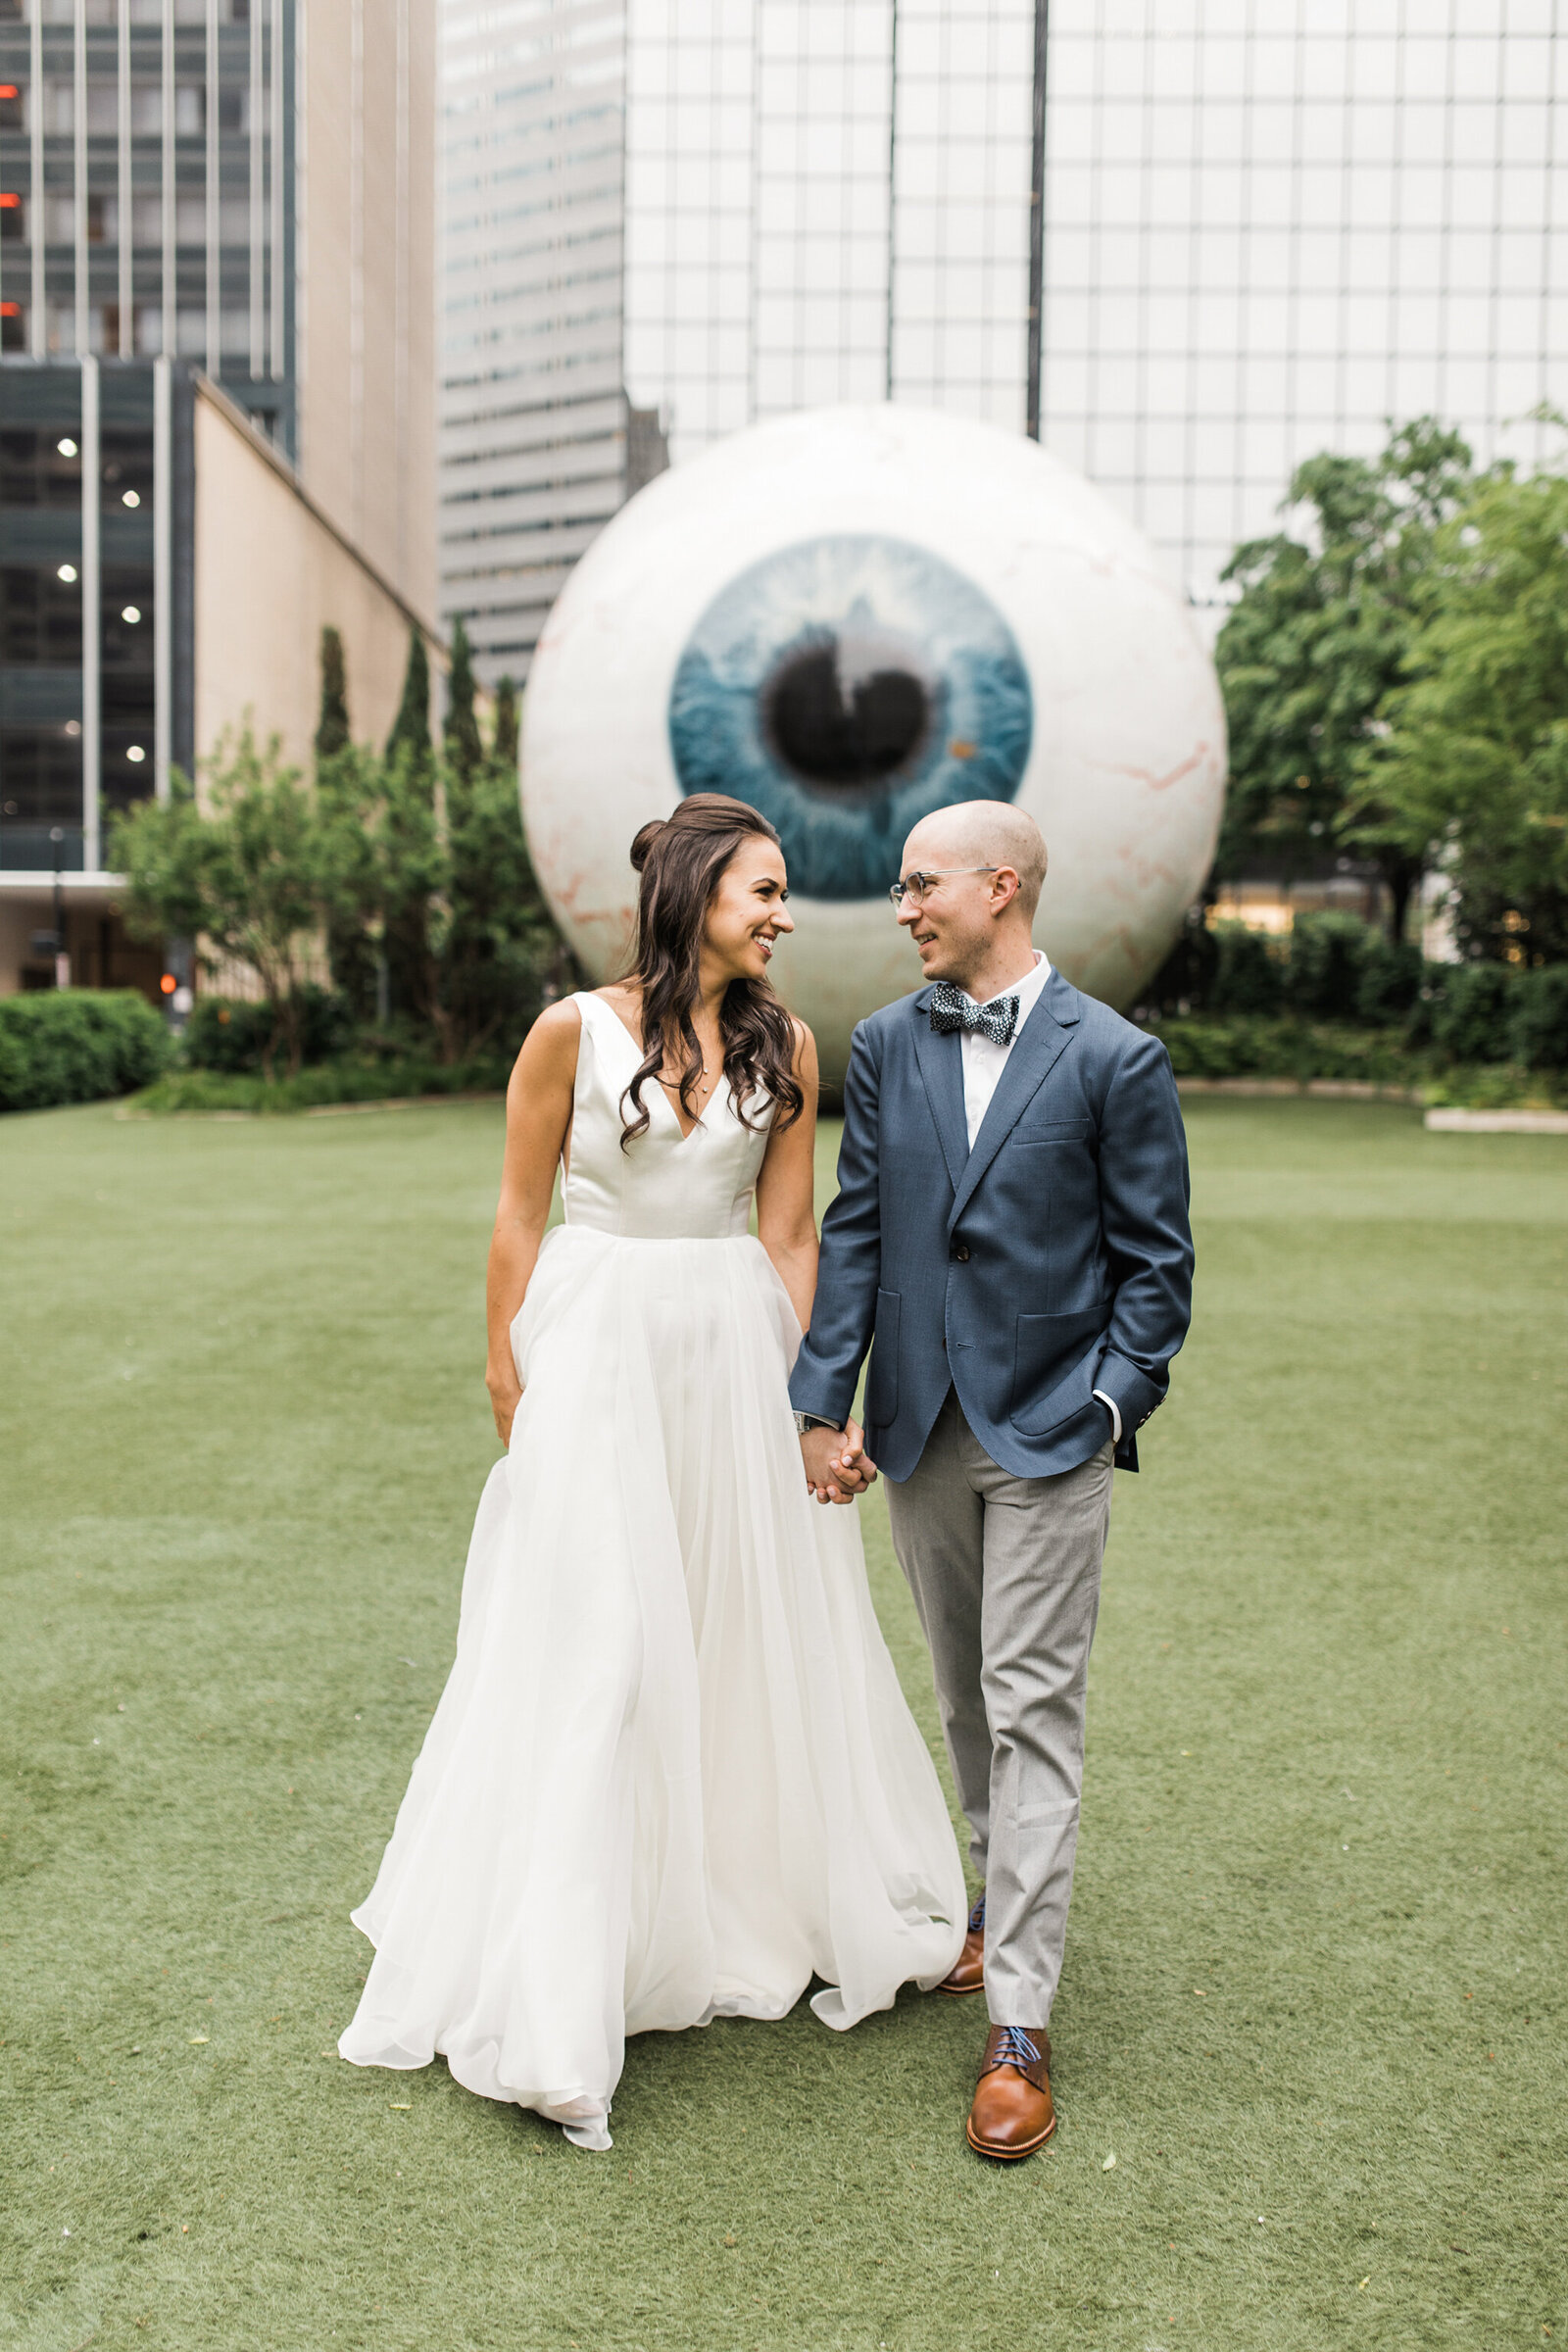 A couple standing in front of the Giant Eyeball in Dallas, Texas across the street from the Joule hotel in Dallas, Texas. The bride is on the left is wearing a sleeveless, long, white dress. The groom is on the right and is wearing a blue suit with a bowtie.